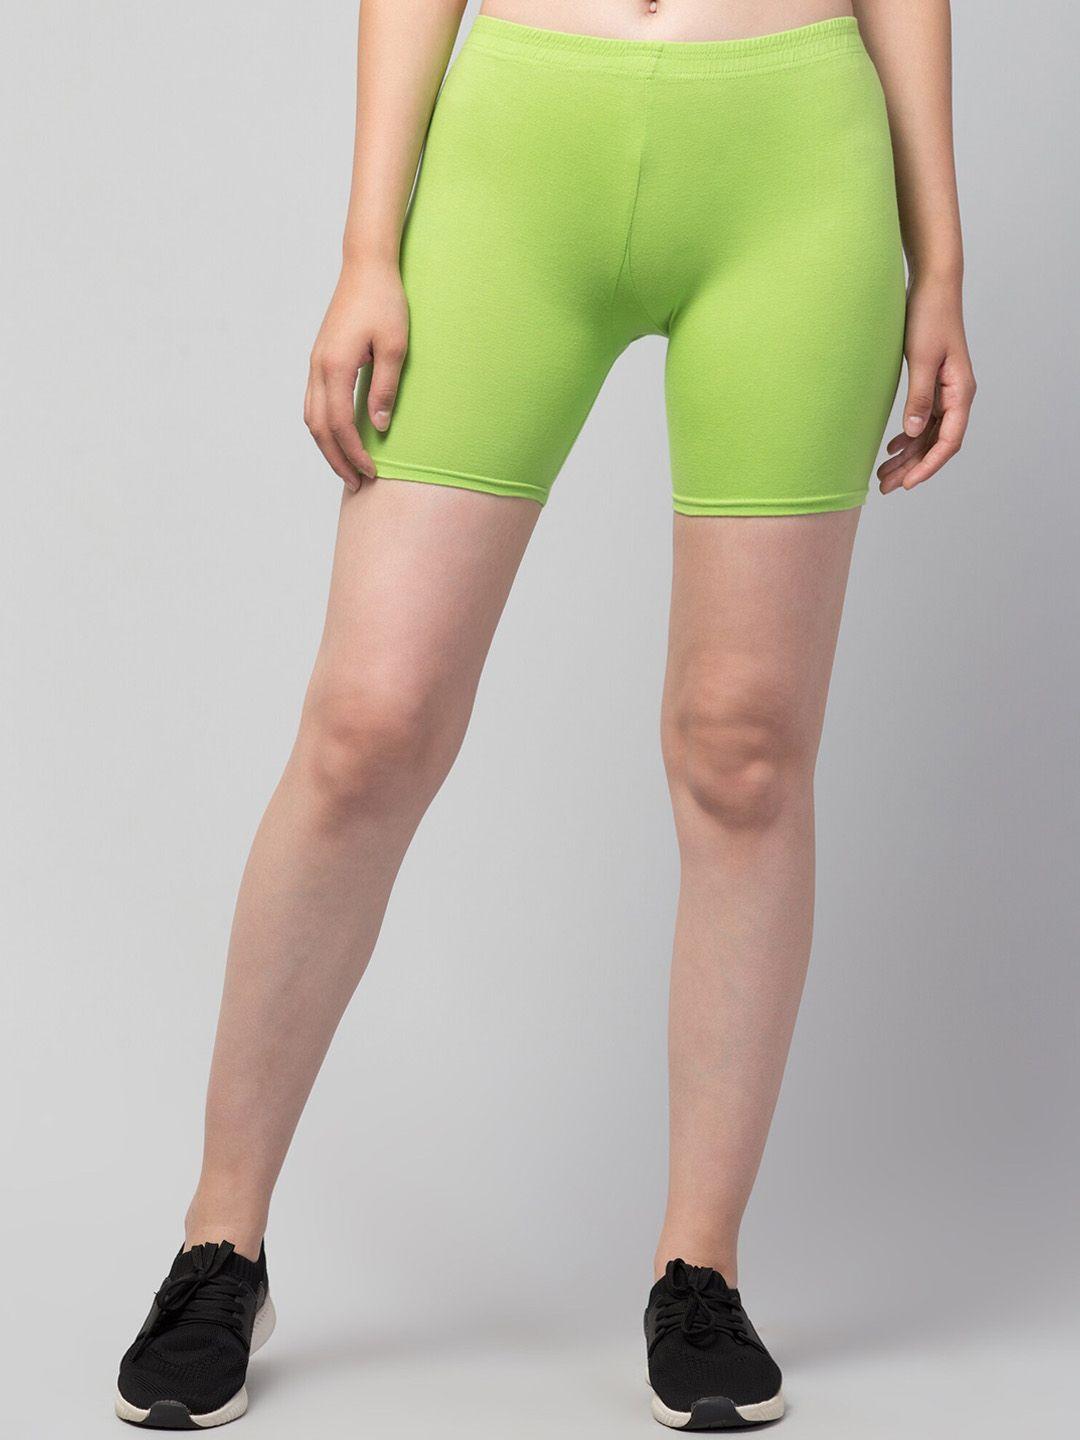 apraa & parma women skinny fit mid-rise cycling shorts